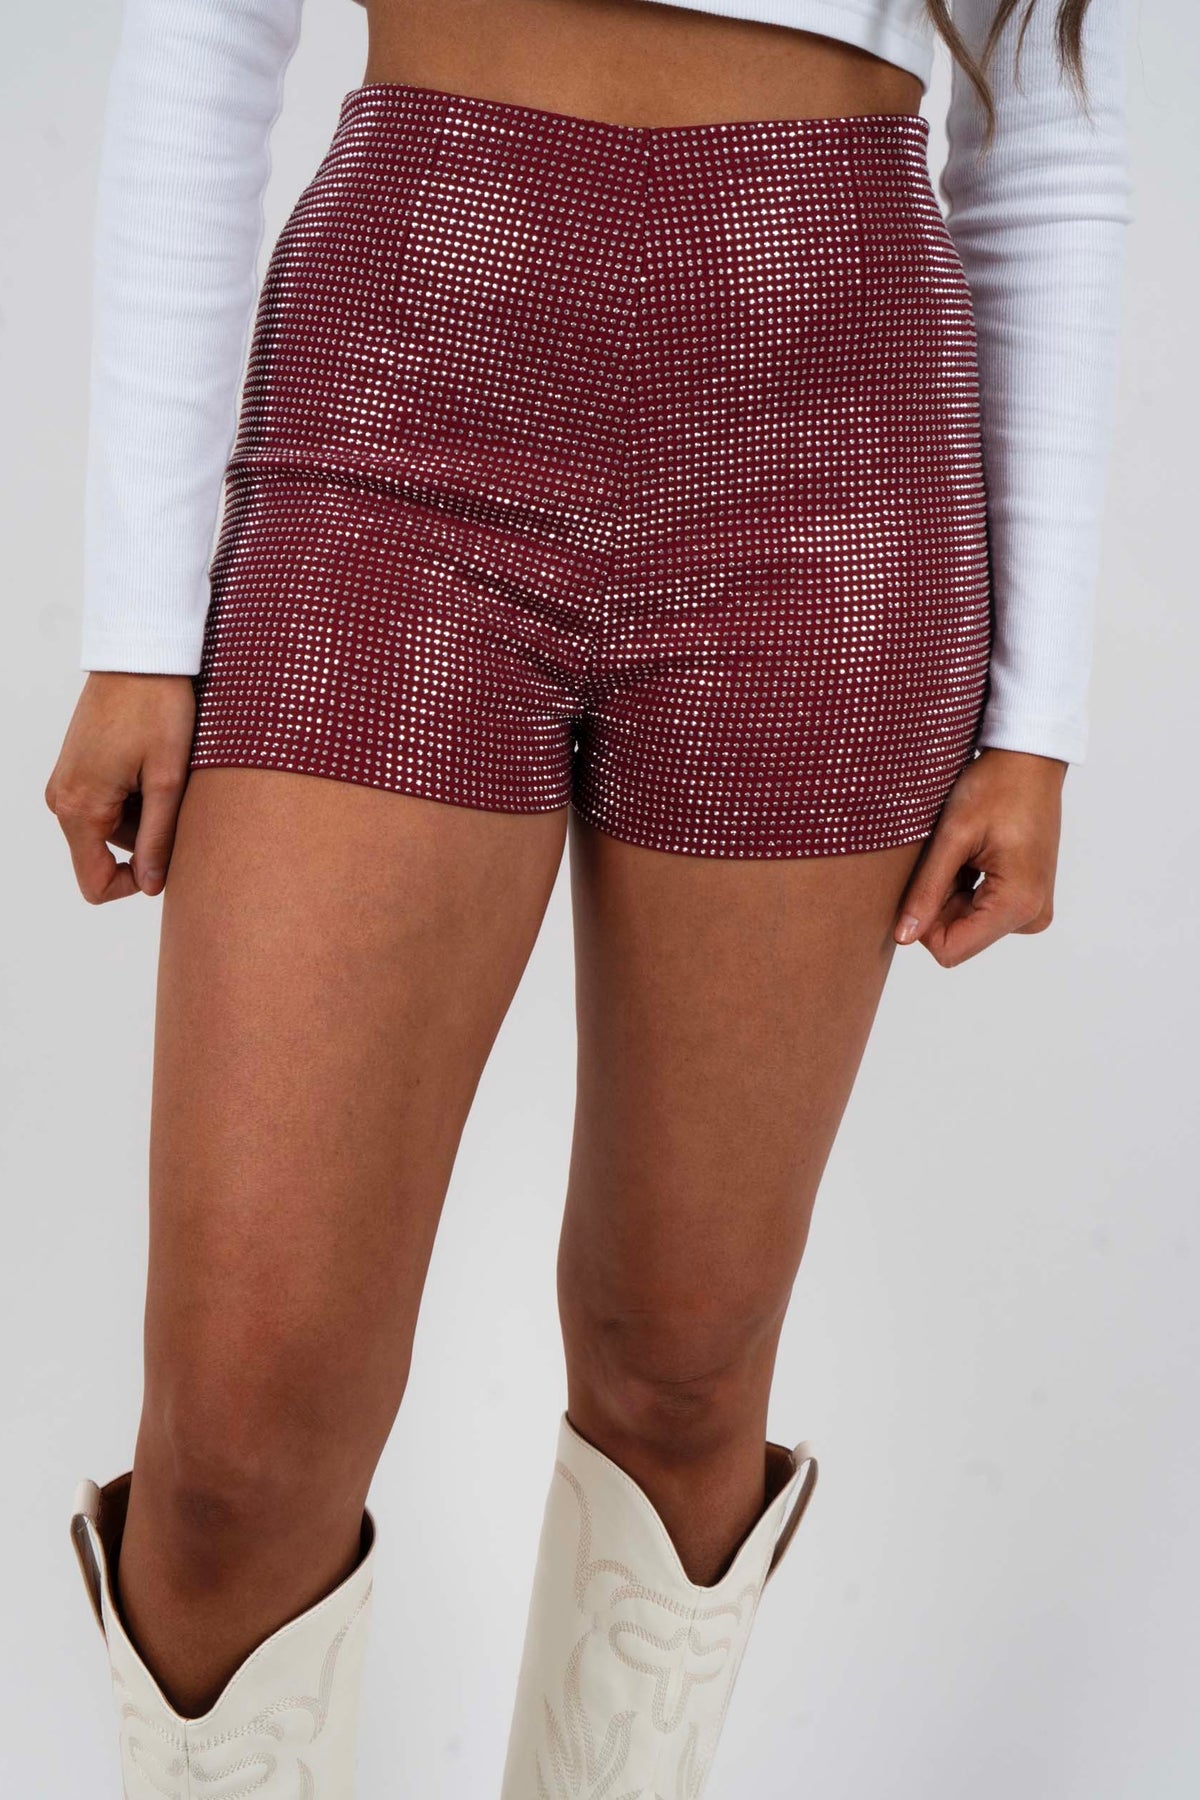 Try To Keep Up Shorts (Burgundy)